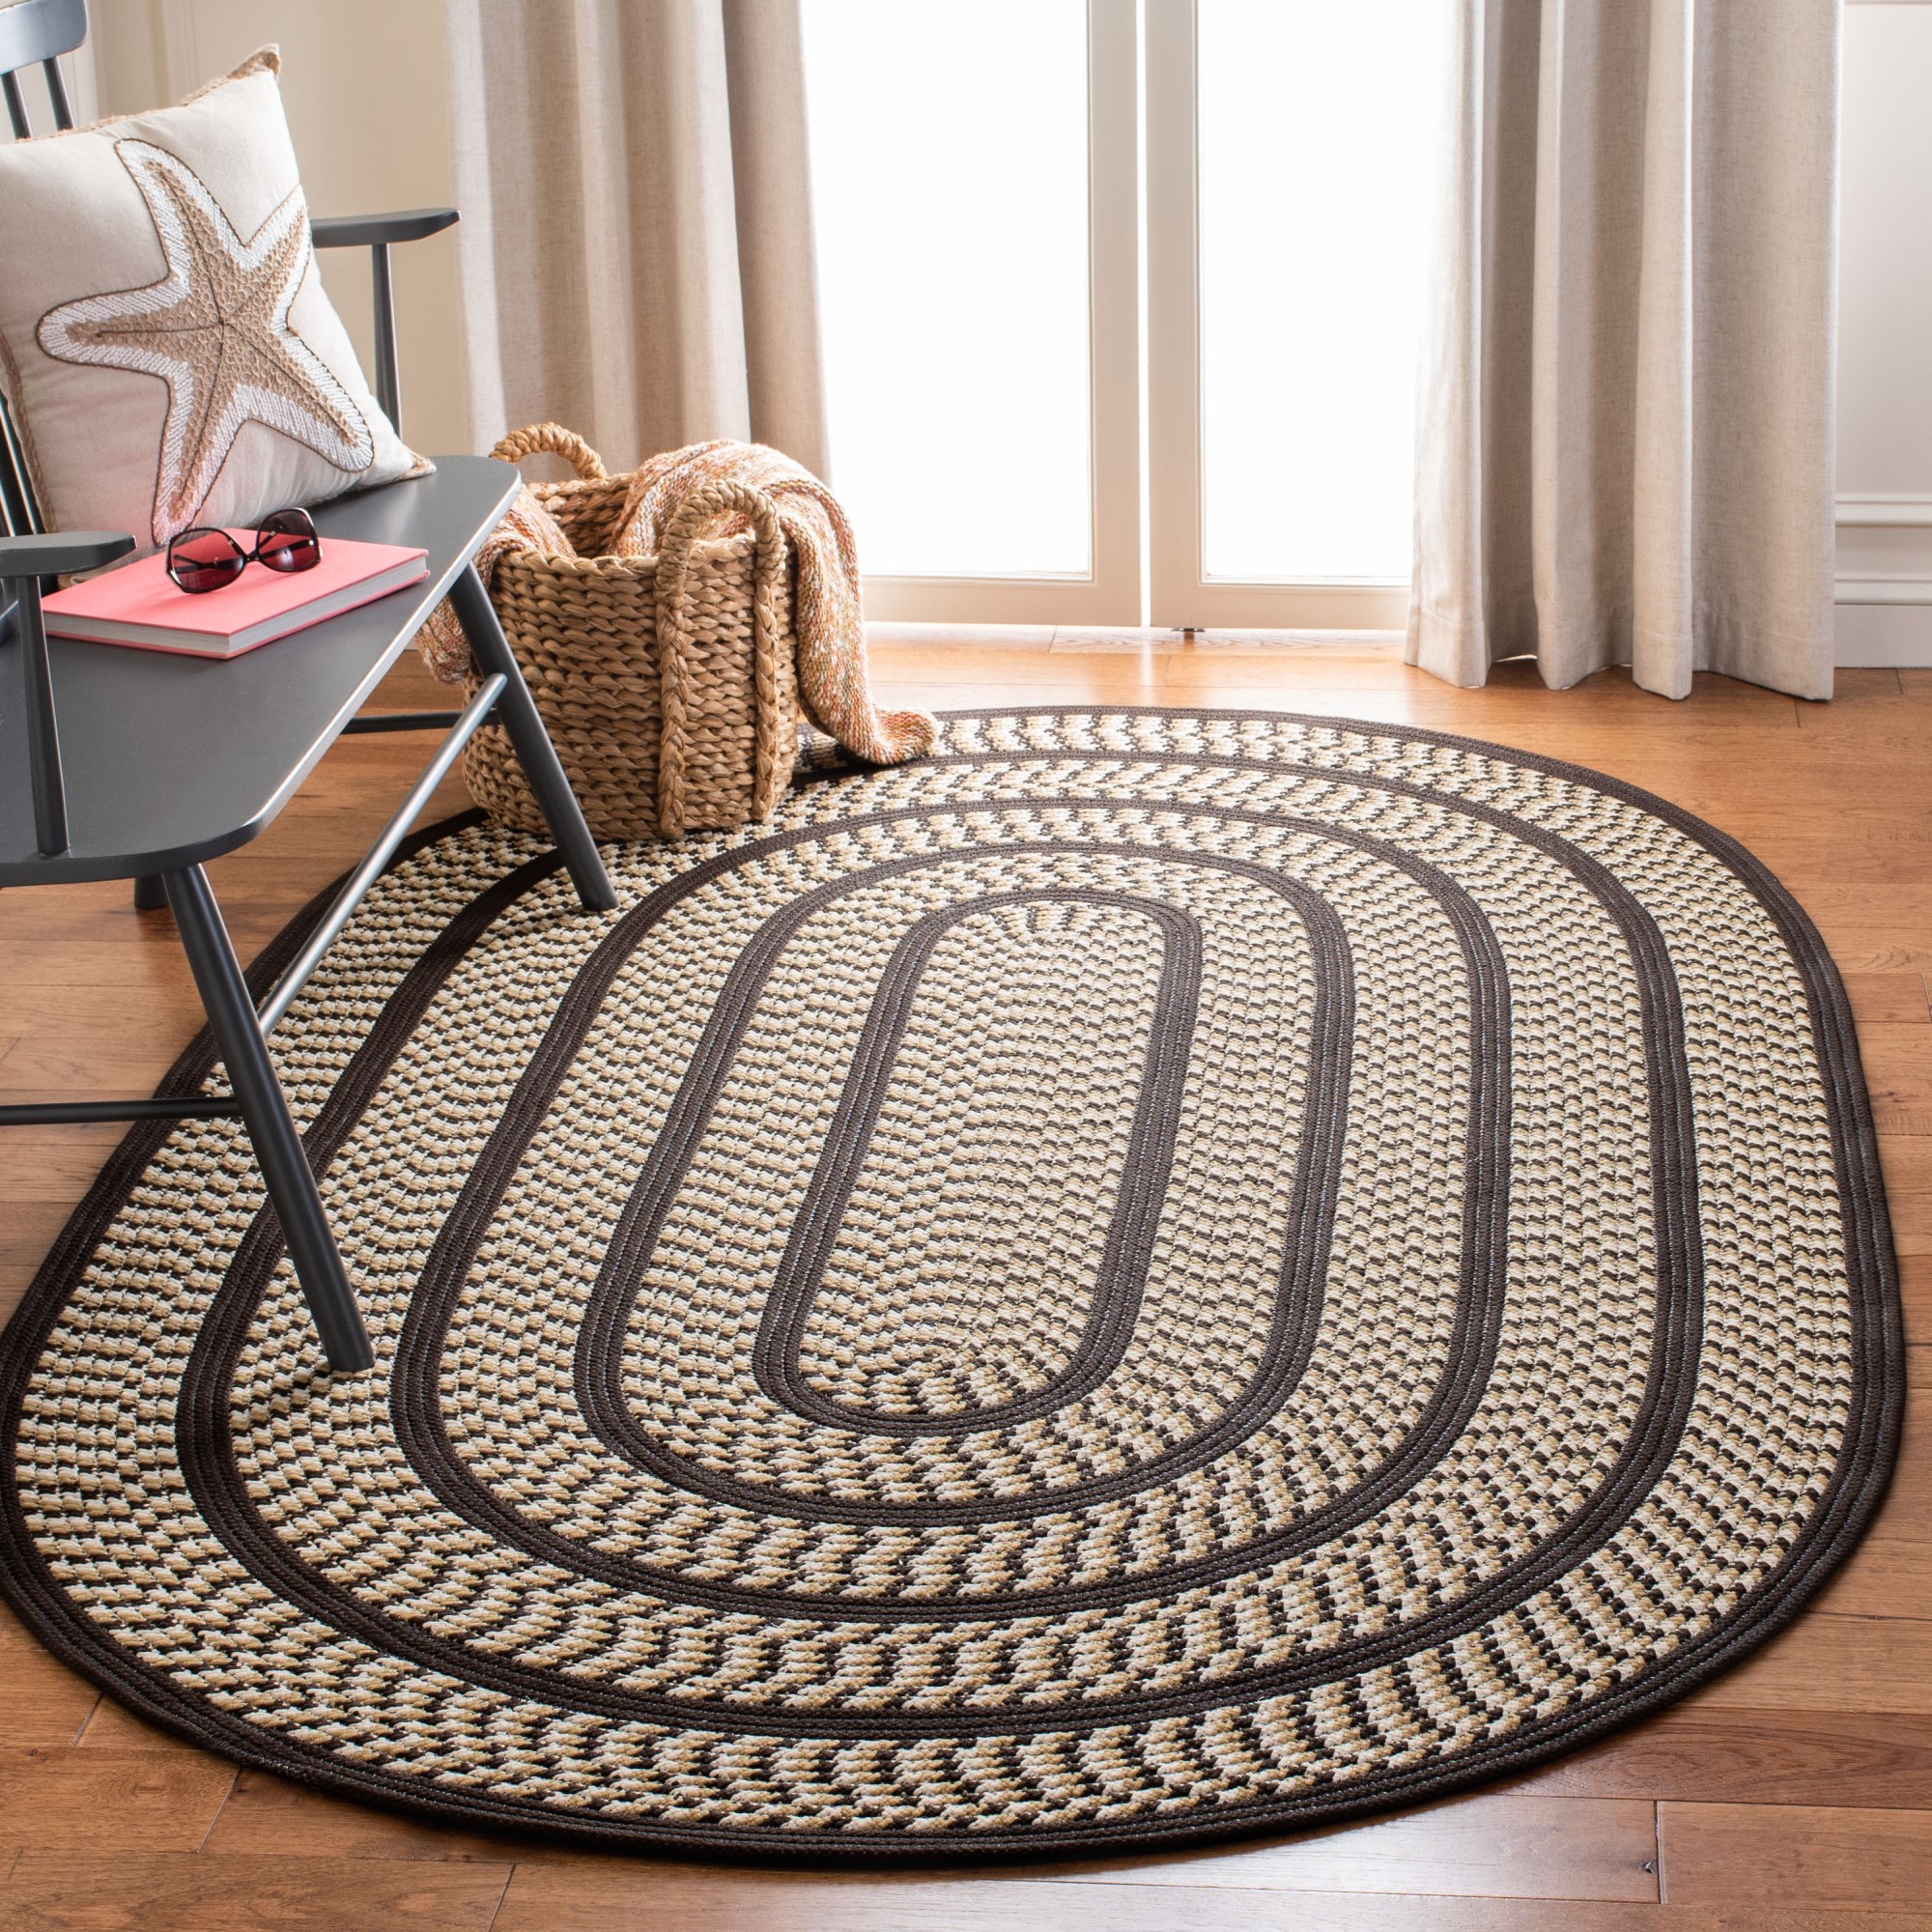  SAFAVIEH Braided Collection Area Rug - 4' Round, Aqua & Ivory,  Handmade Country Cottage Reversible Cotton, Ideal for High Traffic Areas in  Living Room, Bedroom (BRD701J) : Home & Kitchen